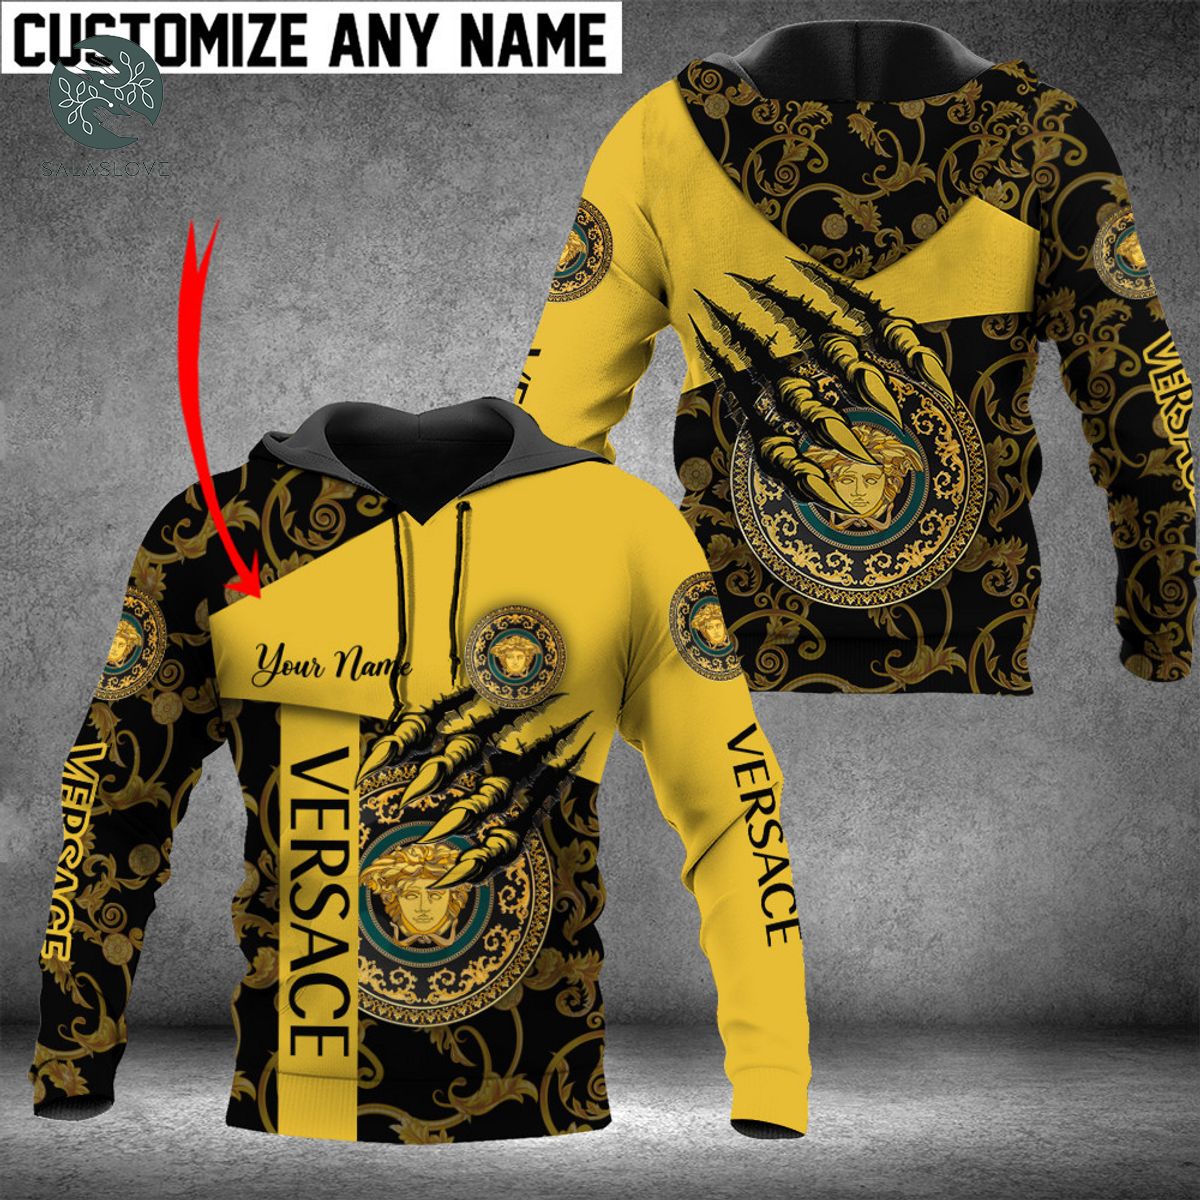 Versace Personalized Name Unisex Hoodie For Men Women